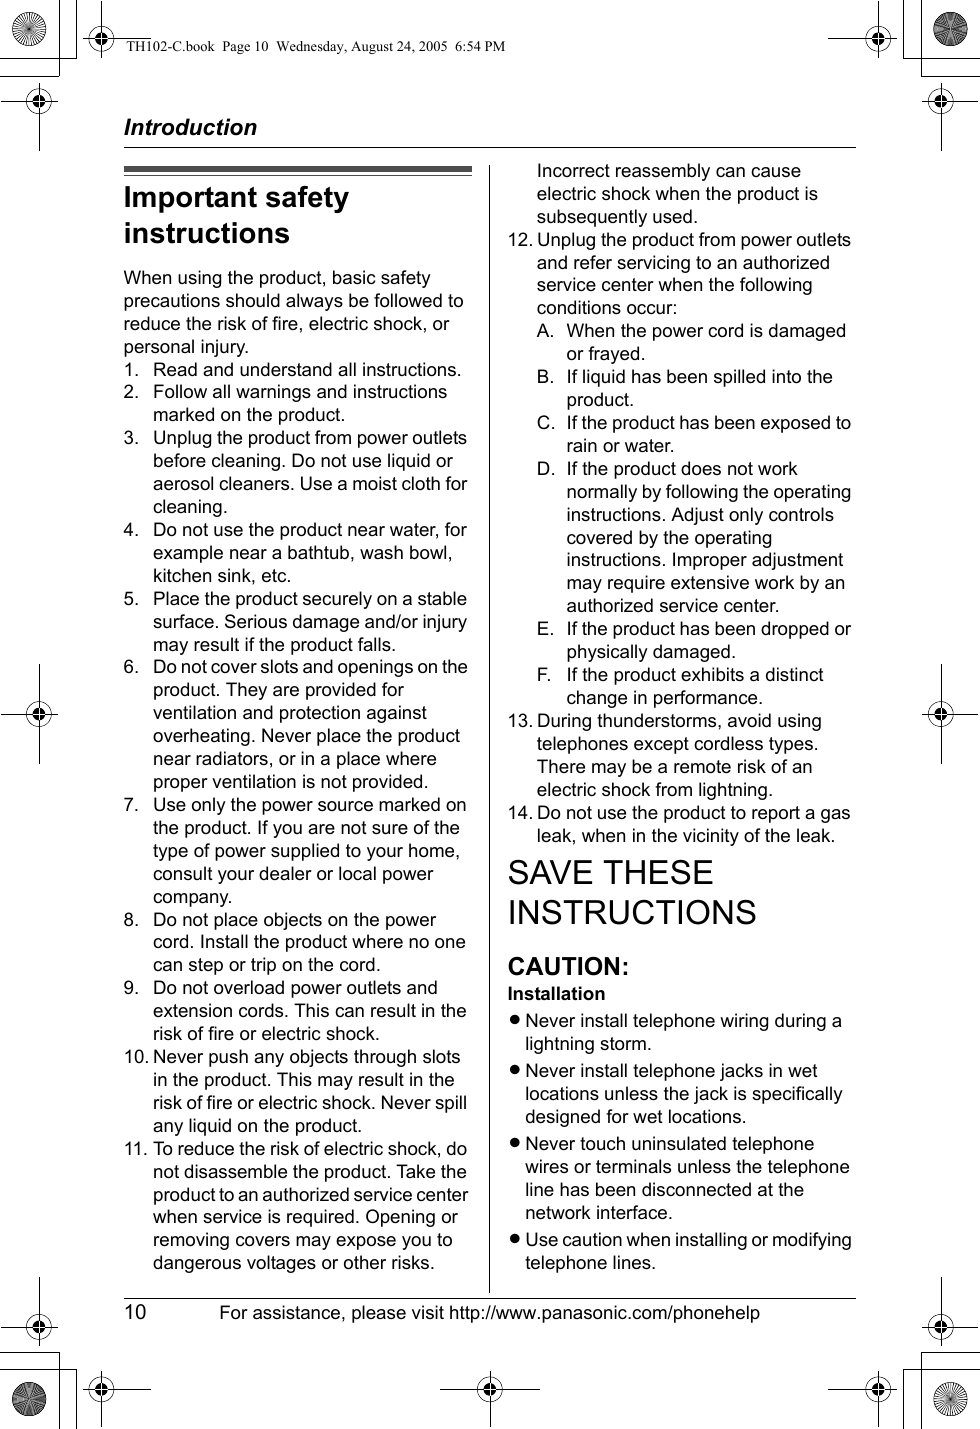 Introduction10 For assistance, please visit http://www.panasonic.com/phonehelpImportant safety instructionsWhen using the product, basic safety precautions should always be followed to reduce the risk of fire, electric shock, or personal injury.1. Read and understand all instructions.2. Follow all warnings and instructions marked on the product.3. Unplug the product from power outlets before cleaning. Do not use liquid or aerosol cleaners. Use a moist cloth for cleaning.4. Do not use the product near water, for example near a bathtub, wash bowl, kitchen sink, etc.5. Place the product securely on a stable surface. Serious damage and/or injury may result if the product falls.6. Do not cover slots and openings on the product. They are provided for ventilation and protection against overheating. Never place the product near radiators, or in a place where proper ventilation is not provided.7. Use only the power source marked on the product. If you are not sure of the type of power supplied to your home, consult your dealer or local power company.8. Do not place objects on the power cord. Install the product where no one can step or trip on the cord.9. Do not overload power outlets and extension cords. This can result in the risk of fire or electric shock.10. Never push any objects through slots in the product. This may result in the risk of fire or electric shock. Never spill any liquid on the product.11. To reduce the risk of electric shock, do not disassemble the product. Take the product to an authorized service center when service is required. Opening or removing covers may expose you to dangerous voltages or other risks. Incorrect reassembly can cause electric shock when the product is subsequently used.12. Unplug the product from power outlets and refer servicing to an authorized service center when the following conditions occur:A. When the power cord is damaged or frayed.B. If liquid has been spilled into the product.C. If the product has been exposed to rain or water.D. If the product does not work normally by following the operating instructions. Adjust only controls covered by the operating instructions. Improper adjustment may require extensive work by an authorized service center.E. If the product has been dropped or physically damaged.F. If the product exhibits a distinct change in performance.13. During thunderstorms, avoid using telephones except cordless types. There may be a remote risk of an electric shock from lightning.14. Do not use the product to report a gas leak, when in the vicinity of the leak.SAVE THESE INSTRUCTIONSCAUTION:InstallationLNever install telephone wiring during a lightning storm.LNever install telephone jacks in wet locations unless the jack is specifically designed for wet locations.LNever touch uninsulated telephone wires or terminals unless the telephone line has been disconnected at the network interface.LUse caution when installing or modifying telephone lines.TH102-C.book  Page 10  Wednesday, August 24, 2005  6:54 PM